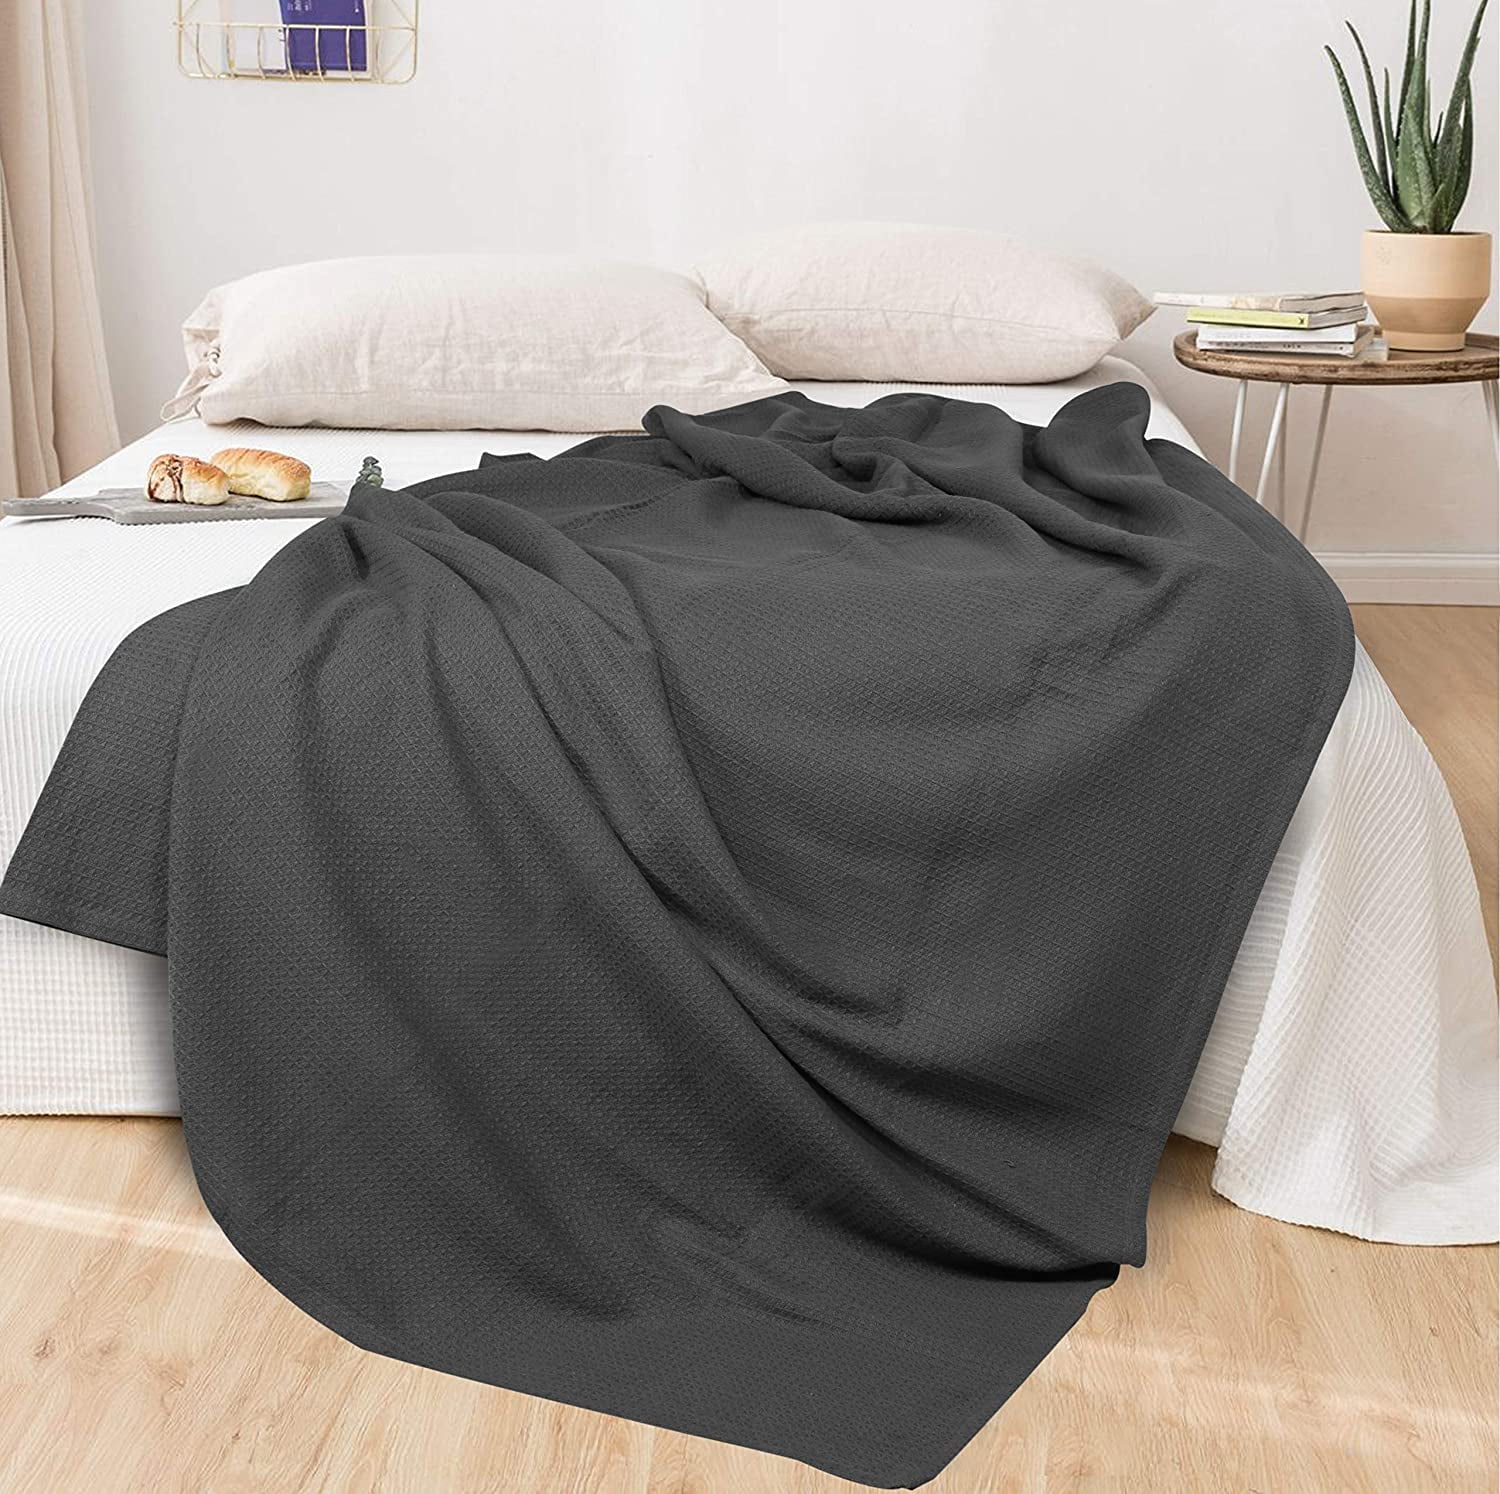 Perfect for Layering Any Bed White Color Size 60x90 inch,Light Thermal Blankets,Twin Thermal Blankets,Breathable Blanket,Twin Thermal Blankets All Season Cotton Thermal Blanket in Basket Weave 